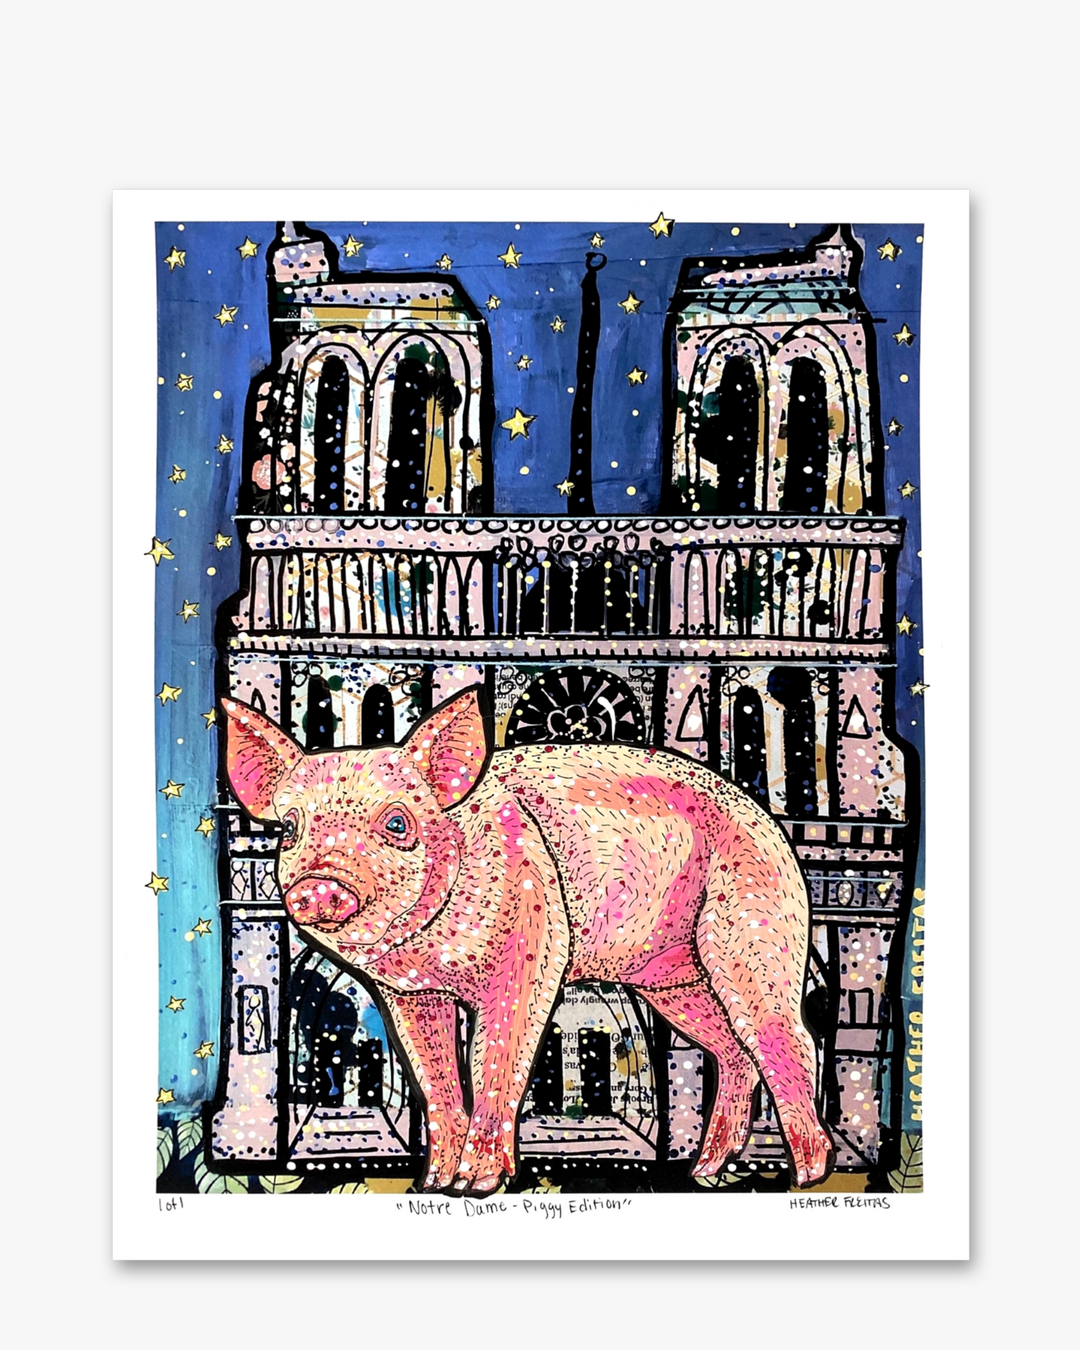 Notre Dame - Piggy Edition ( Painted Over Print ) - Heather Freitas 